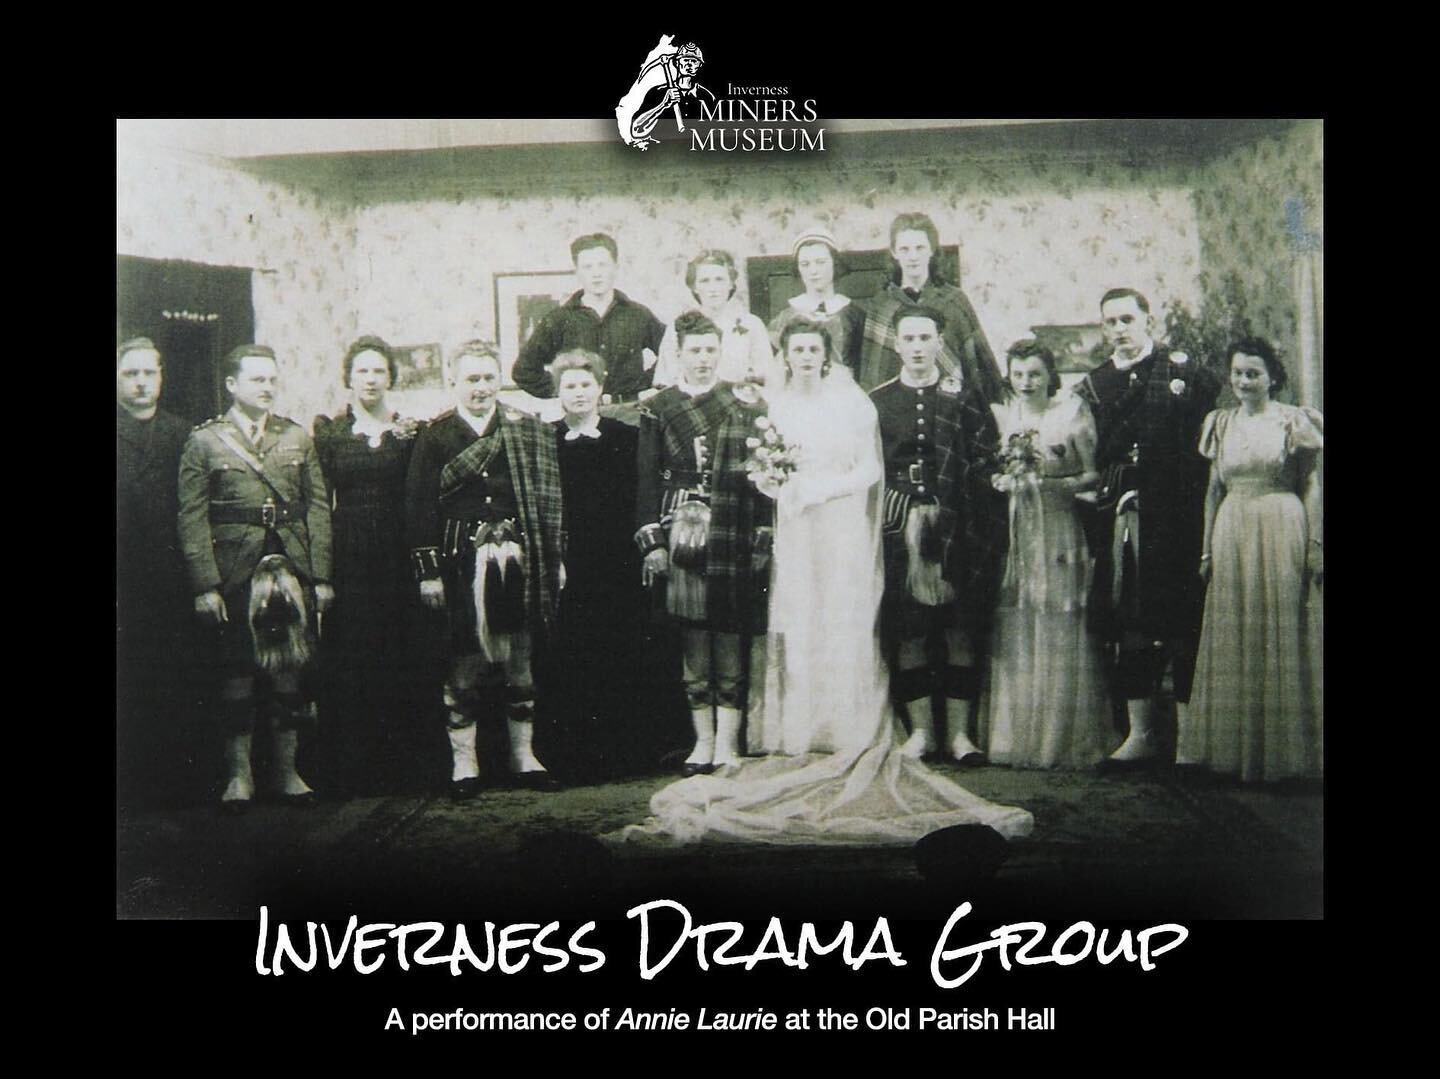 📸 From the Archives 📸 

Inverness Drama Group at the Old Parish Hall.

L to R Back Row: R.D. Smith, Rosalie MacDonald, Teresa Grant, Josephine Ryan. 

L to R Front Row: John Beaton, Donald Chisholm, Kathleen MacDonald, Frank Chisholm, Martha Delane